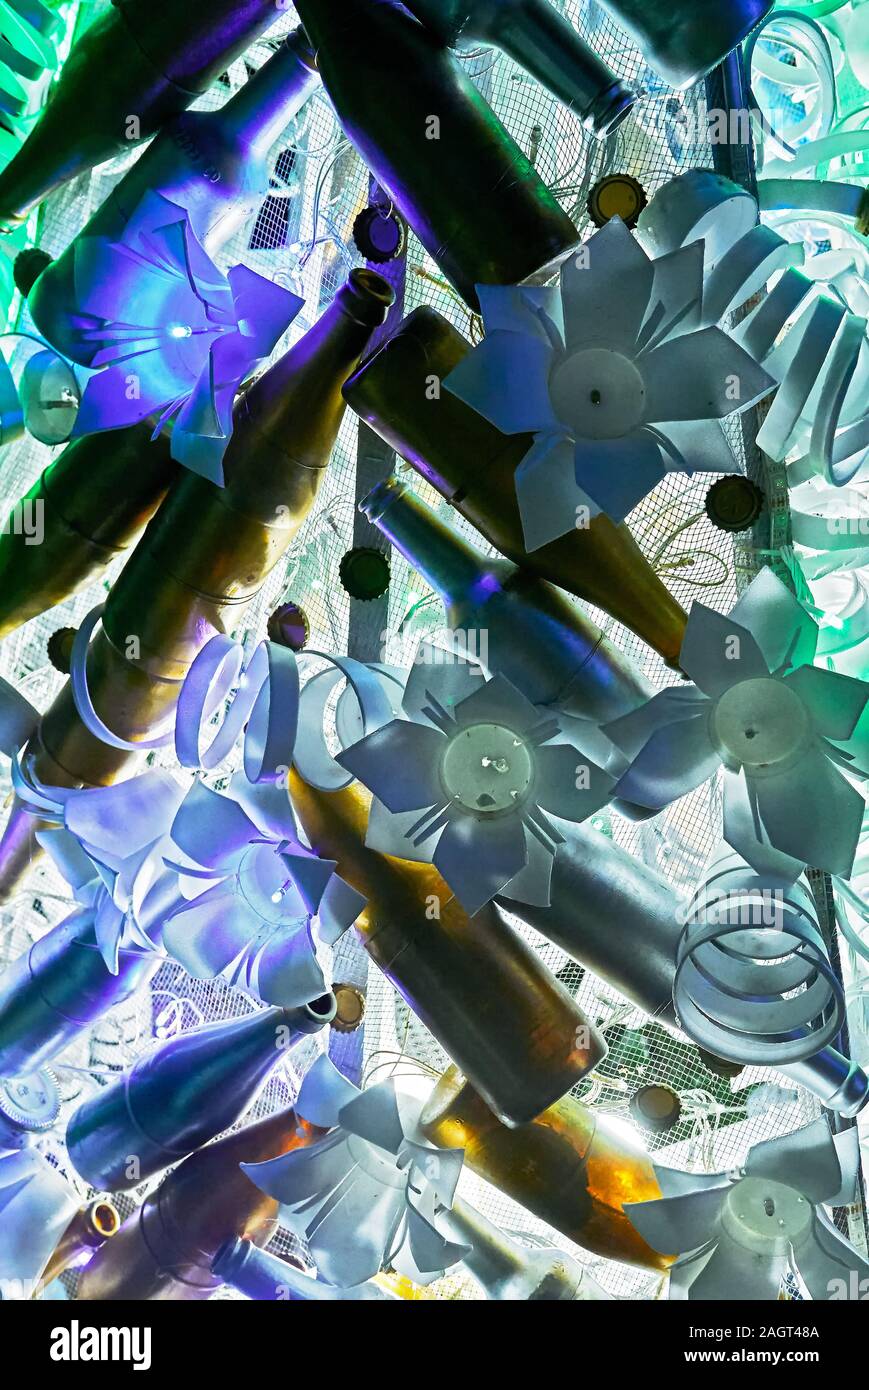 Close-up of a unusual Christmas decoration of recycled plastics and empty bottles combined with cold flower shaped lights Stock Photo